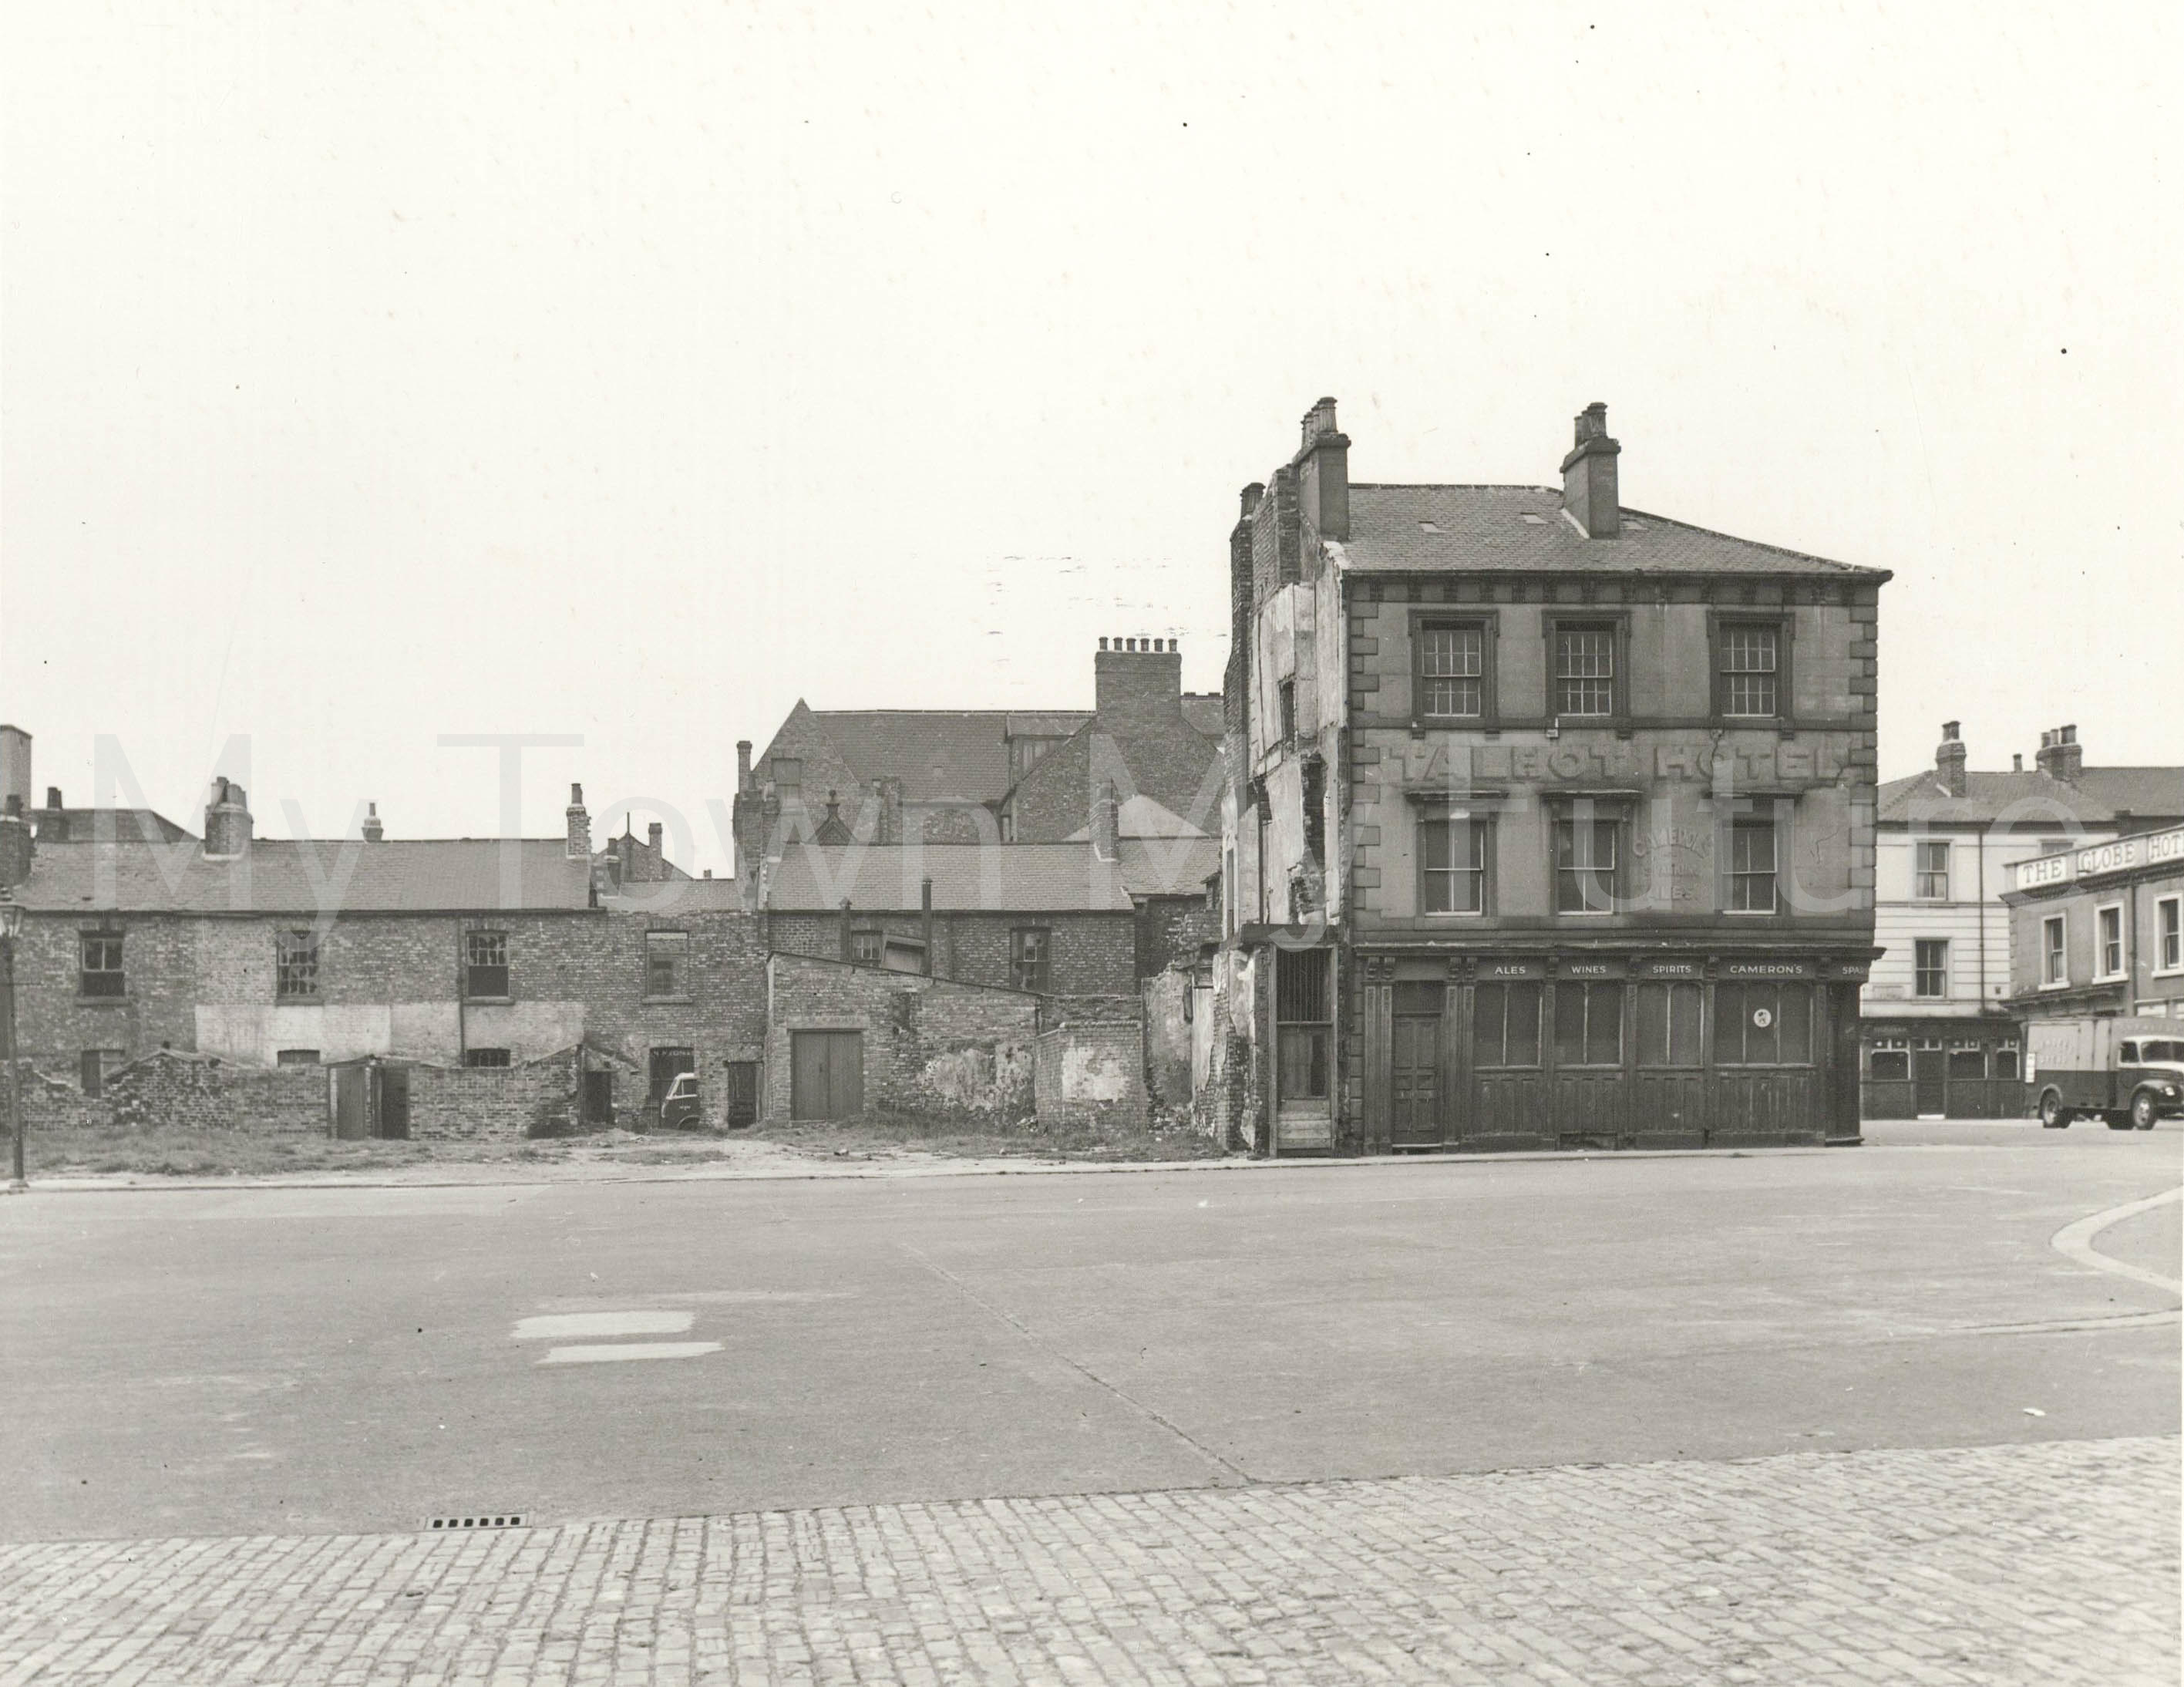 South Street,Market Place,Talbot Hotel